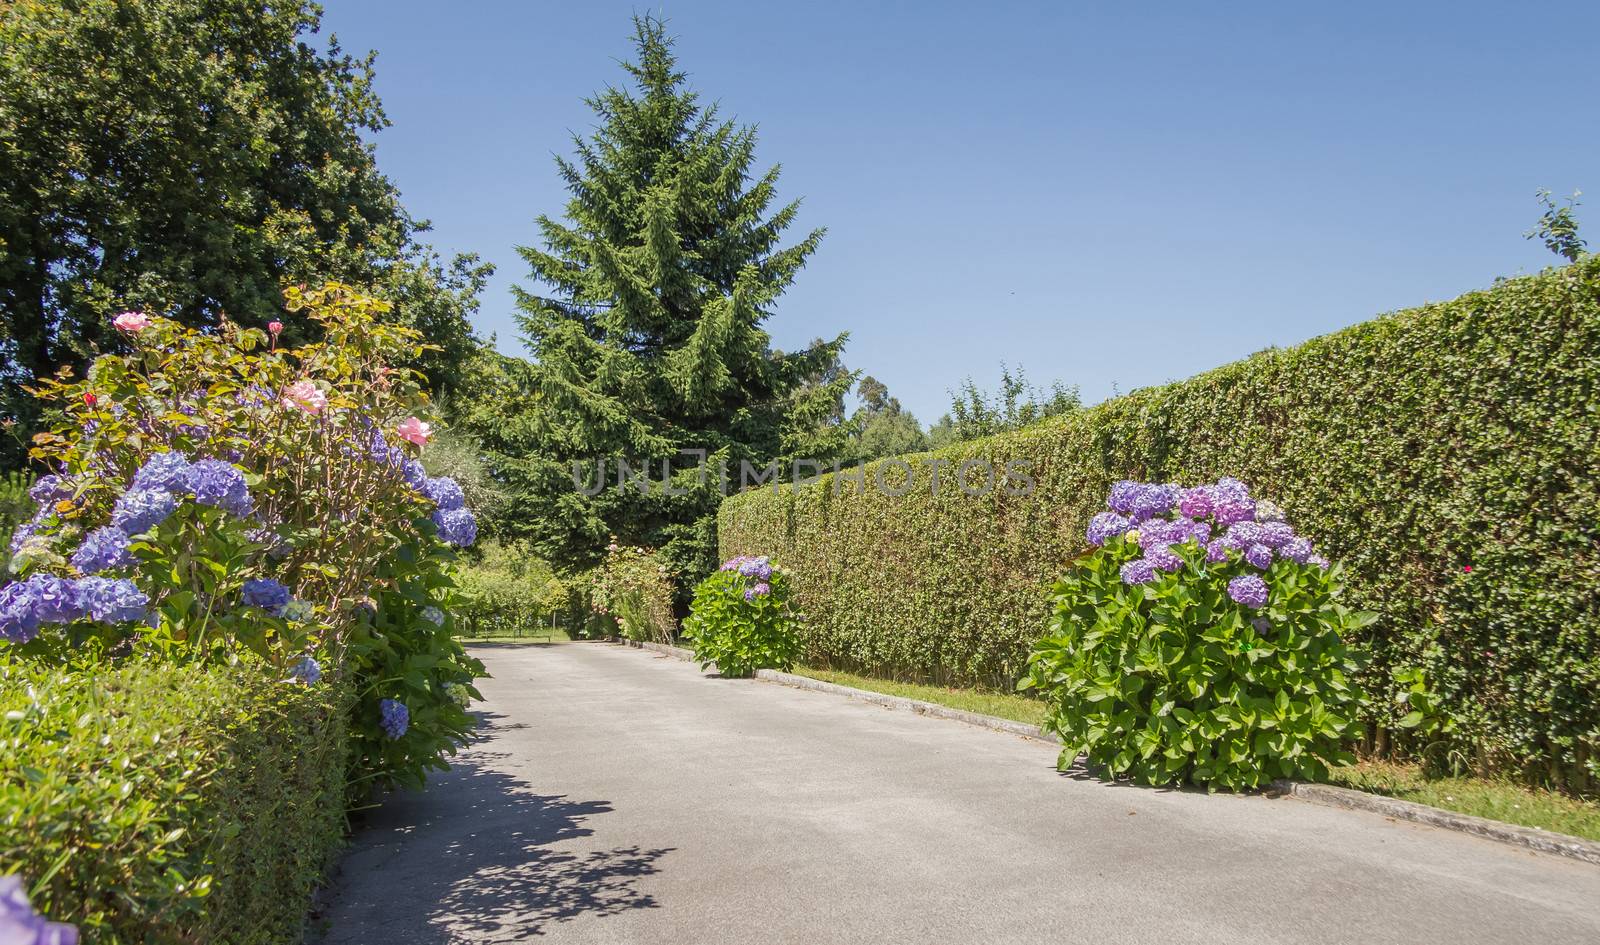 Group of hydrangeas and green fences to sides the road